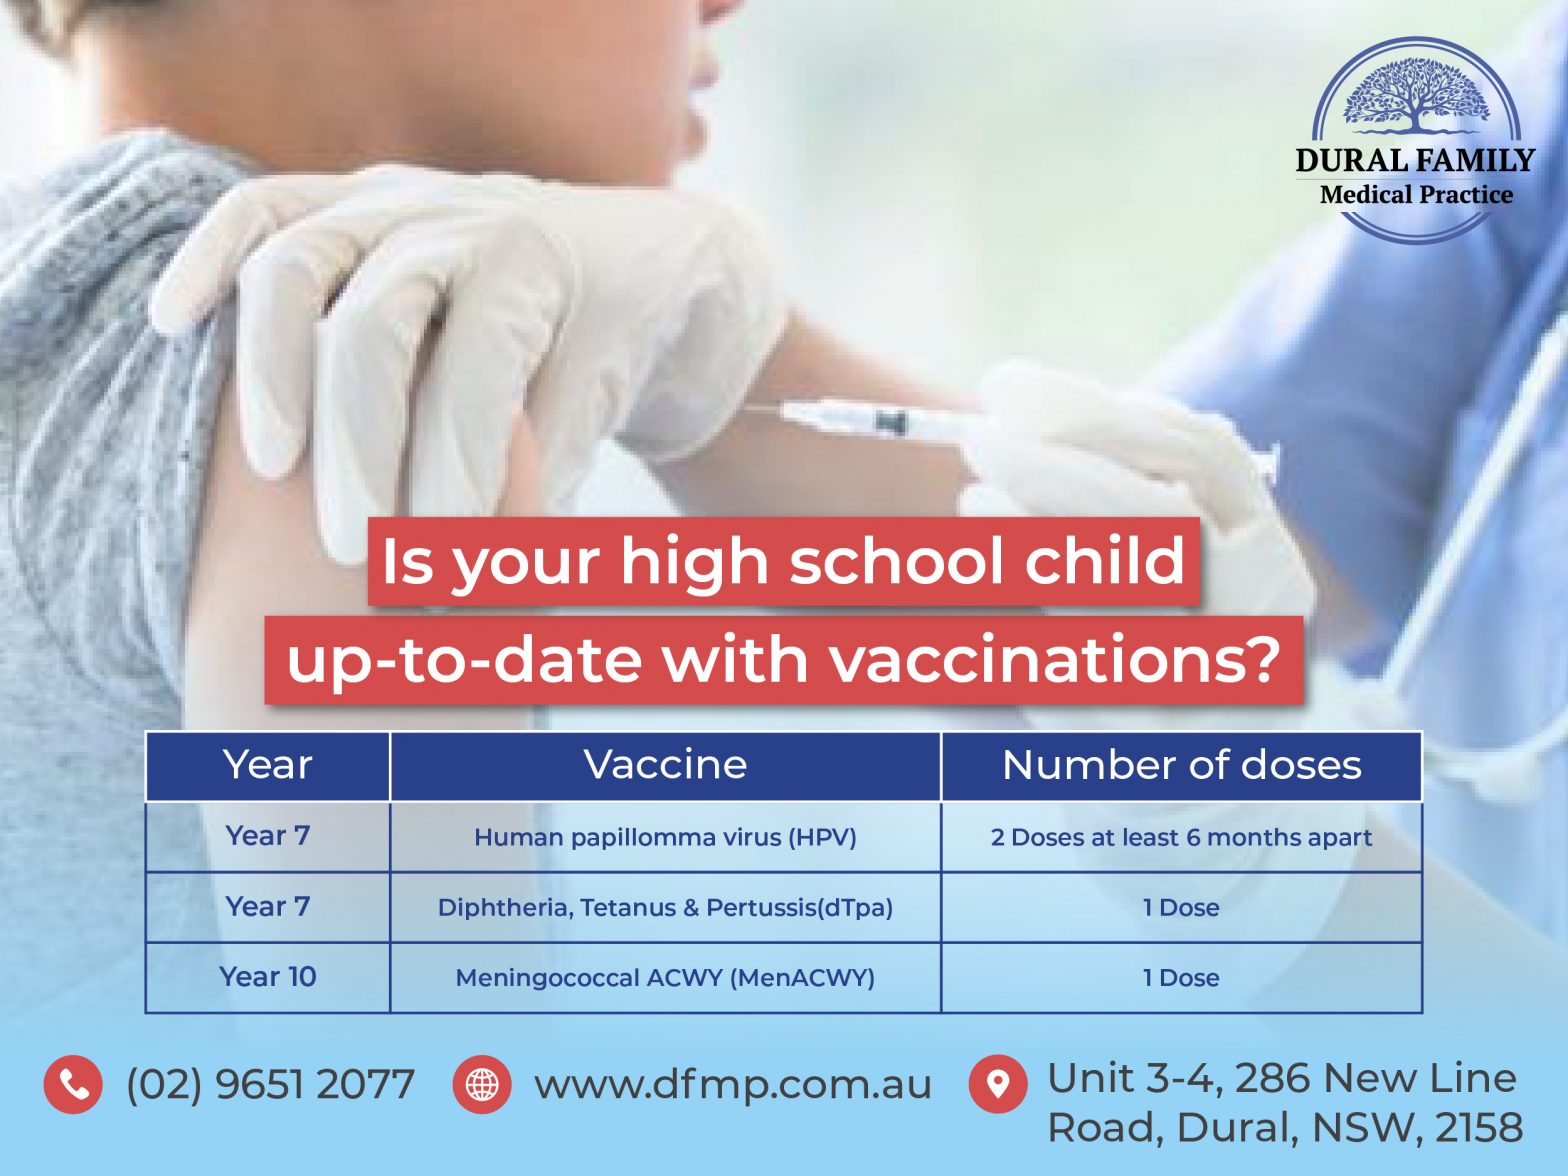 Is your high school child up-to-date with vaccinations?